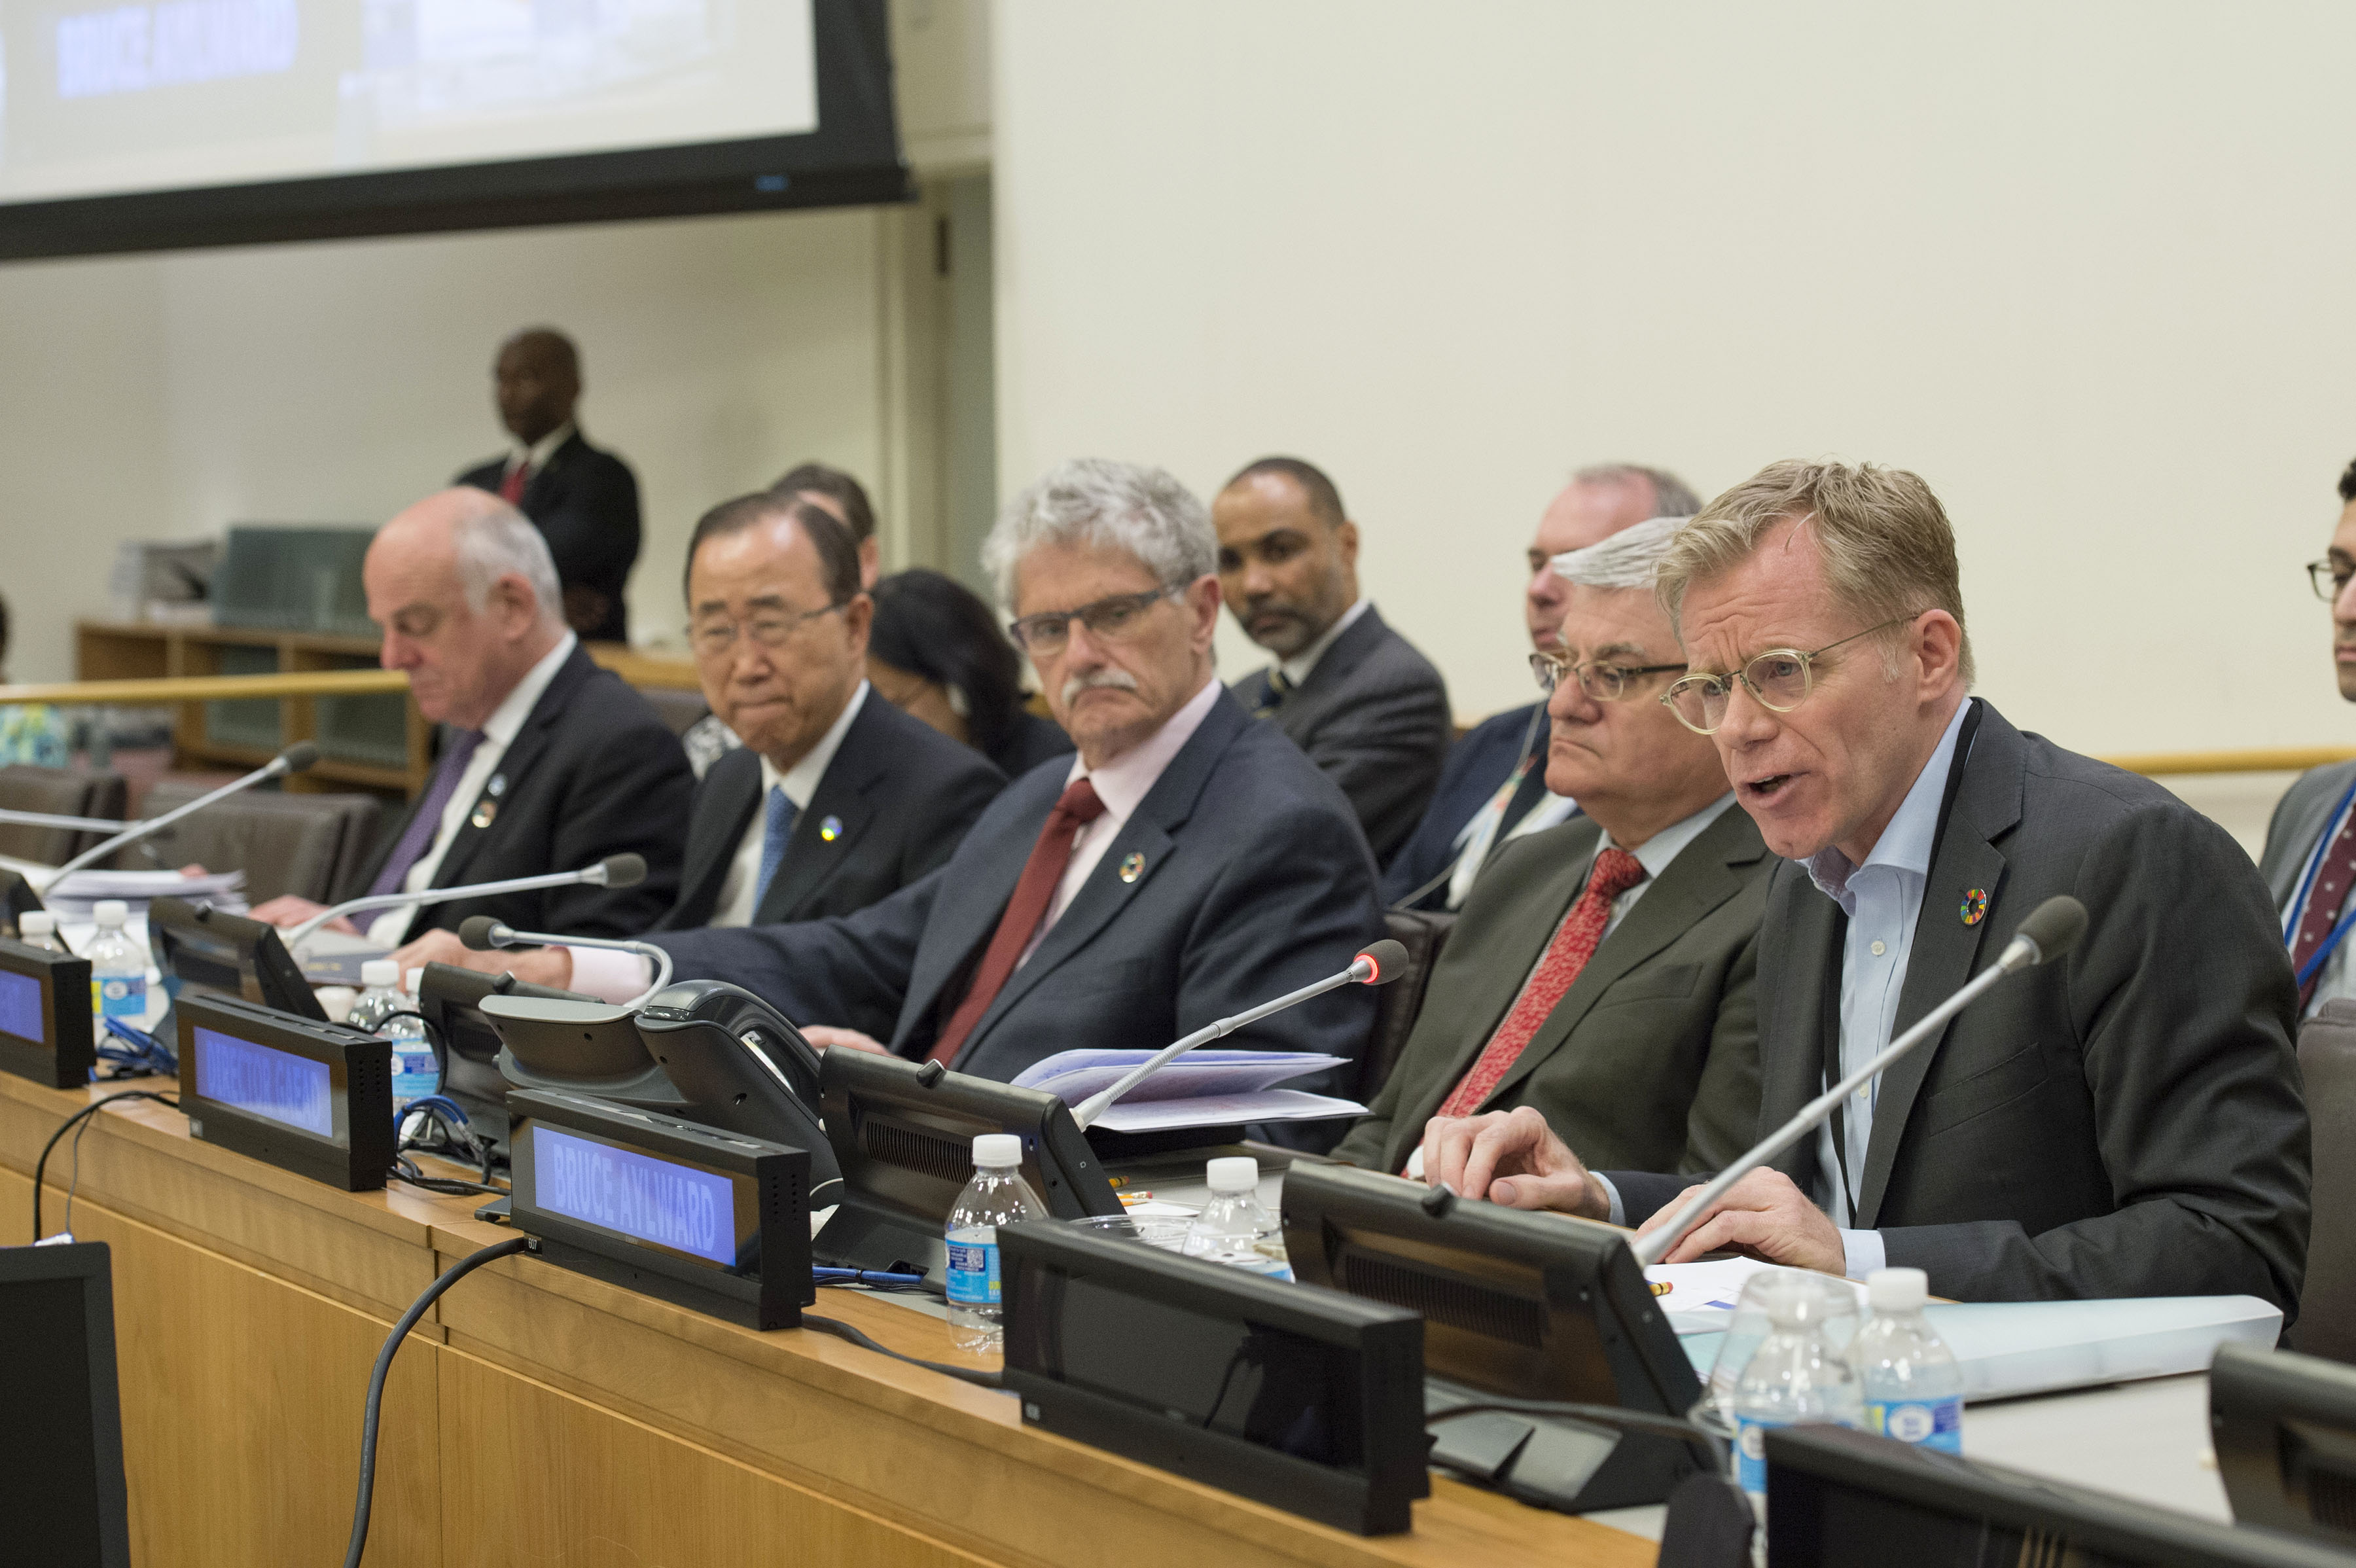 Dr. Bruce Aylward, right, speaks in June 2016 at a briefing to the United Nations General Assembly on the report from U.N. Secretary-General Ban Ki-moon, second from left, on strengthening the global health system. “The Ebola outbreak really brought new urgency to long-needed reform and improvements, not just within WHO and not just within its member states, but also within the whole international architecture,” Aylward told Army AL&T. (U.N. photo by Eskinder Debebe)